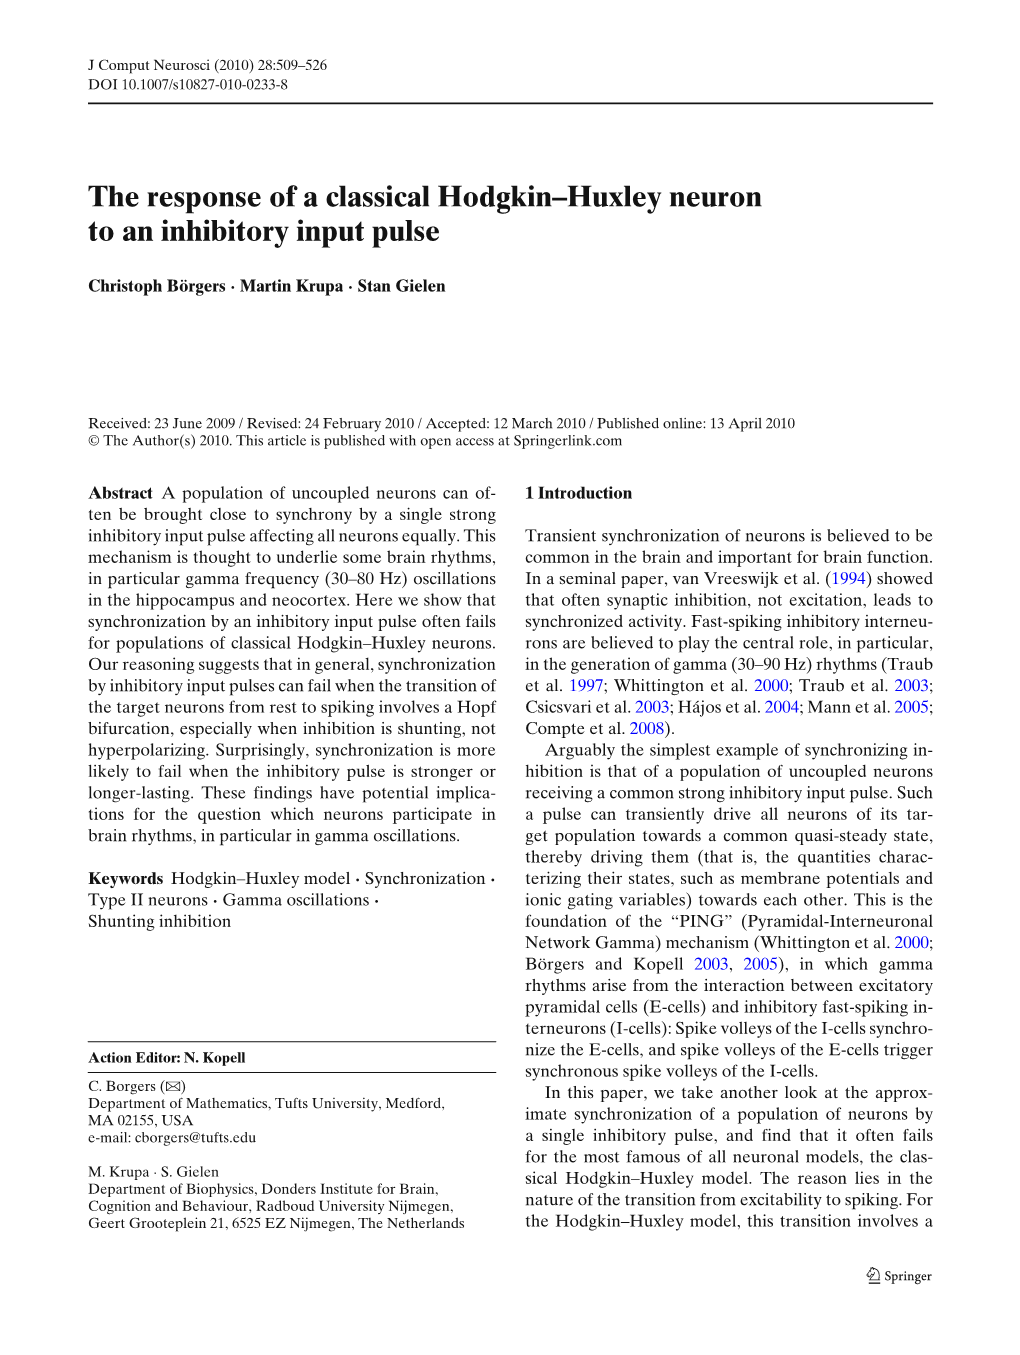 The Response of a Classical Hodgkin–Huxley Neuron to an Inhibitory Input Pulse